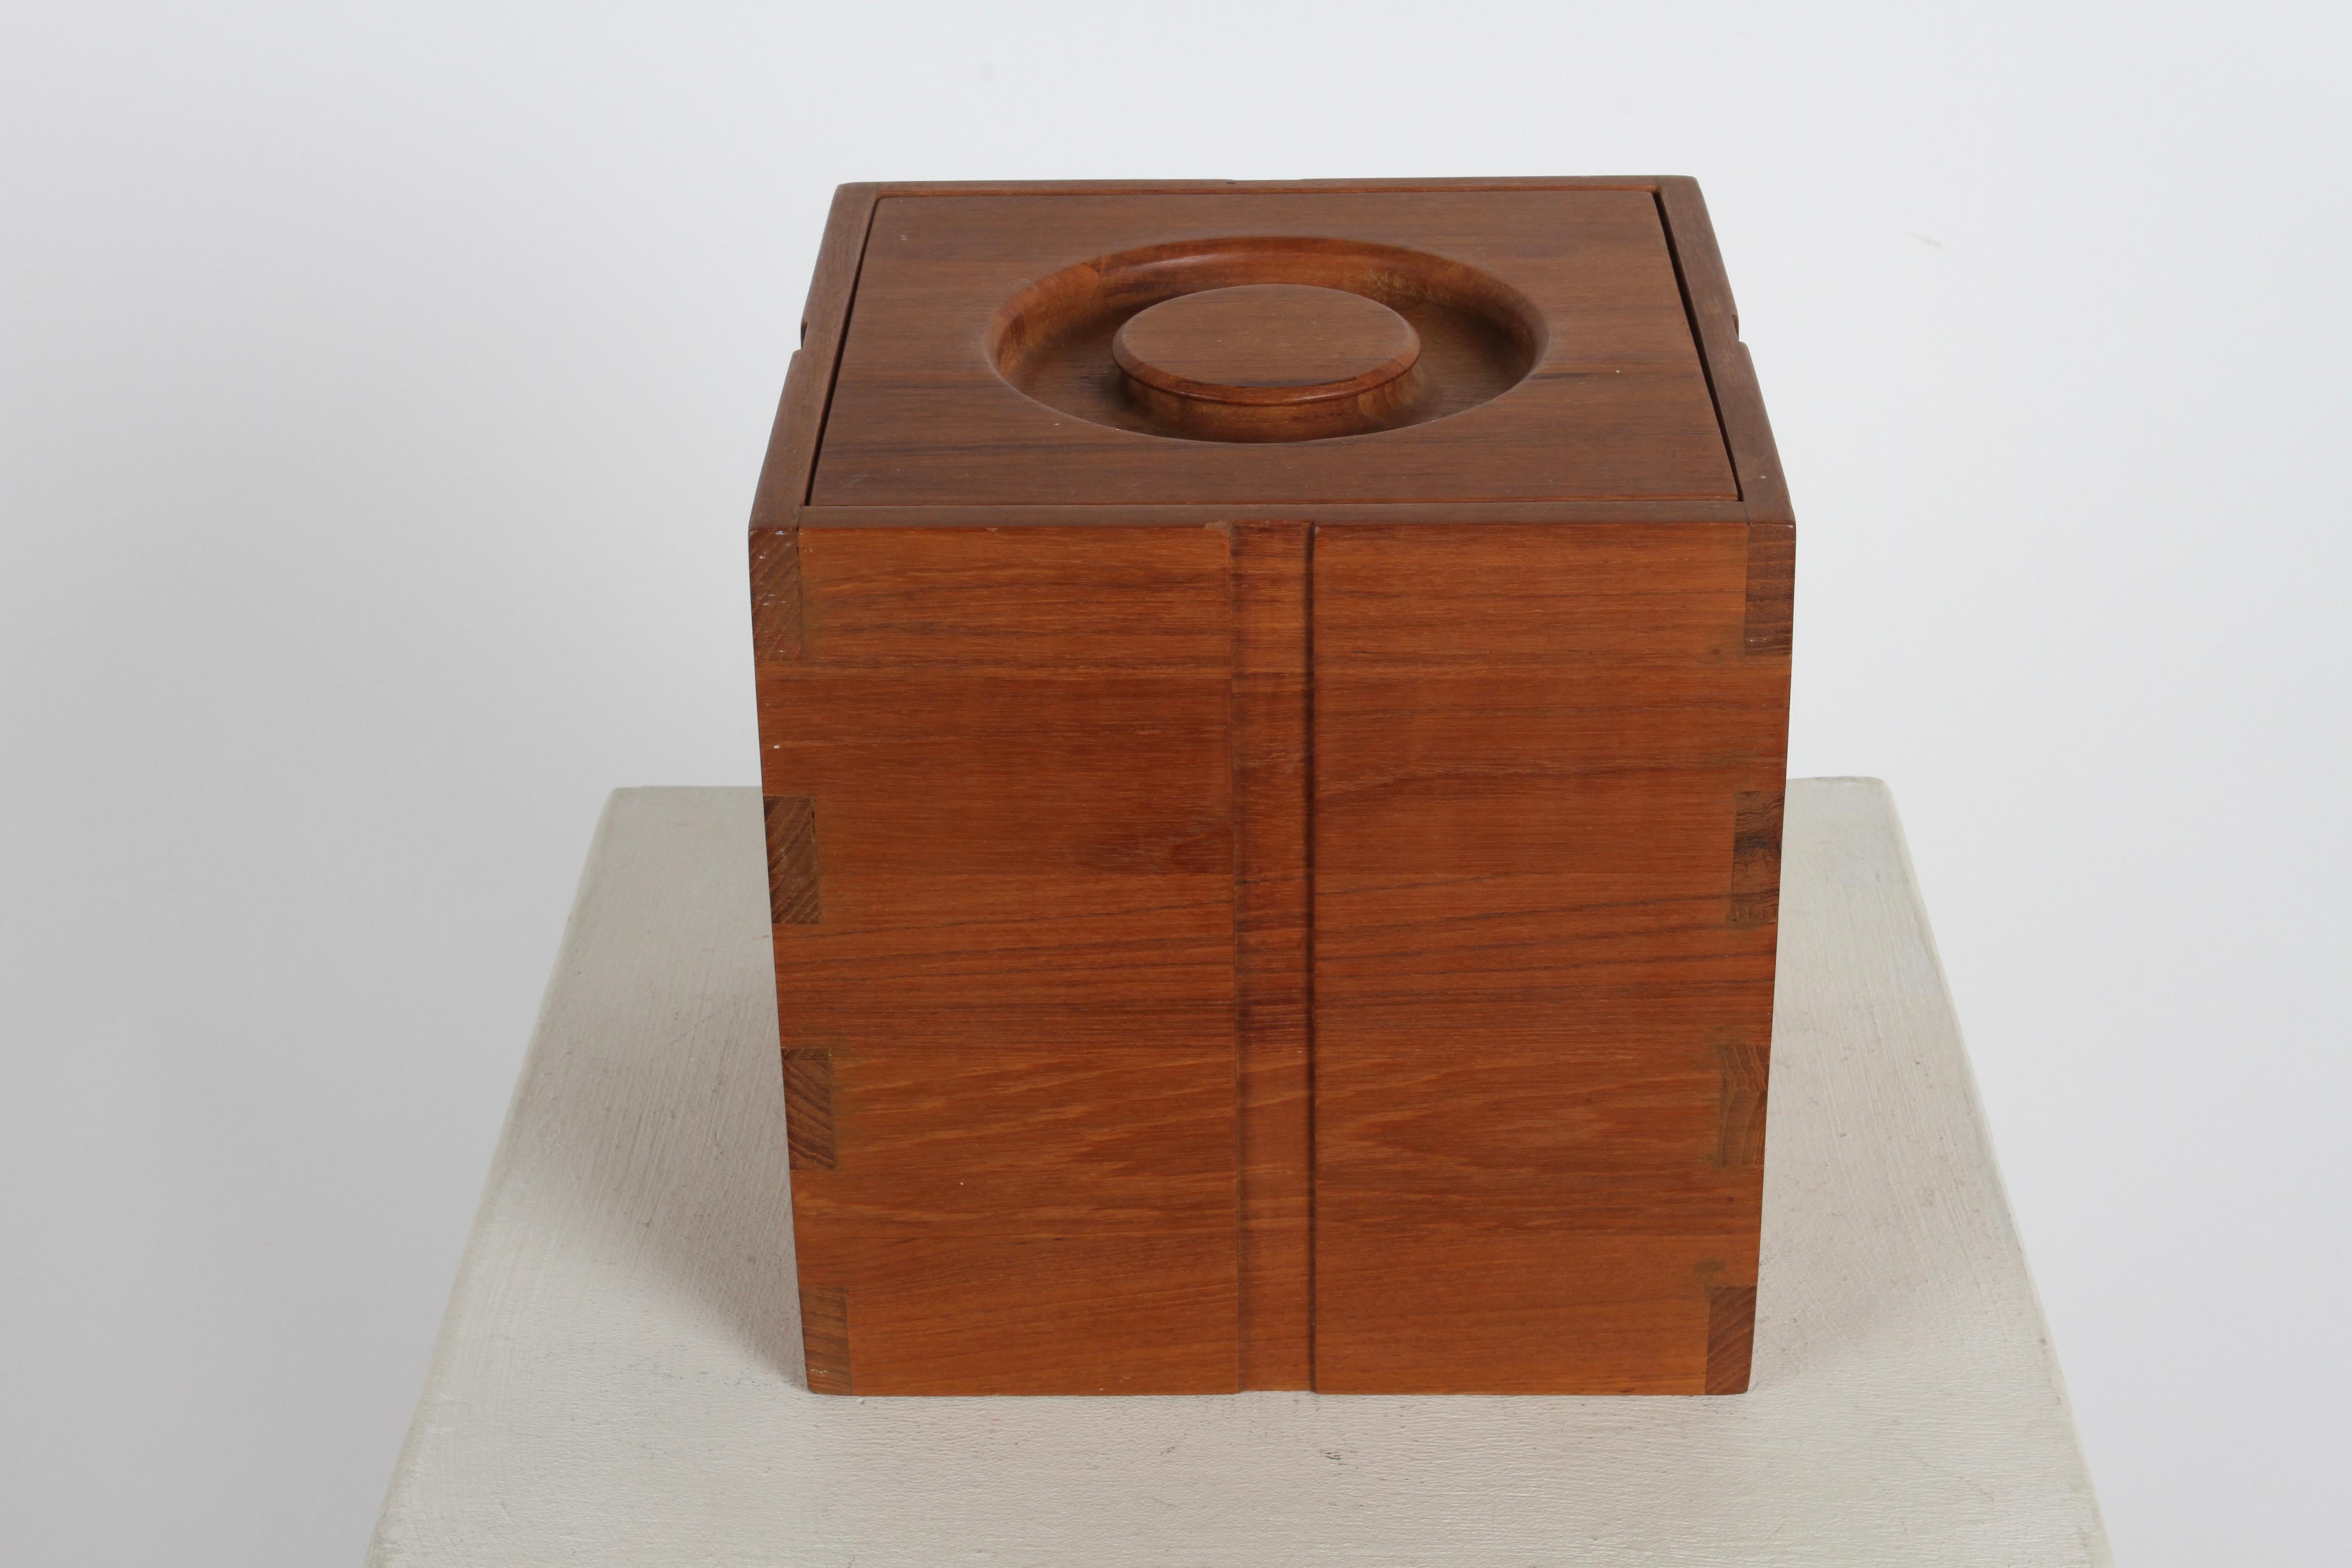 1970s Kalmar Designs Danish Modern style teak wood ice bucket with original thongs and removable plastic liner. Having concentric circle removable lid, brown plastic liner, and wonderful finger joint corners. Appears to have little to no use, label